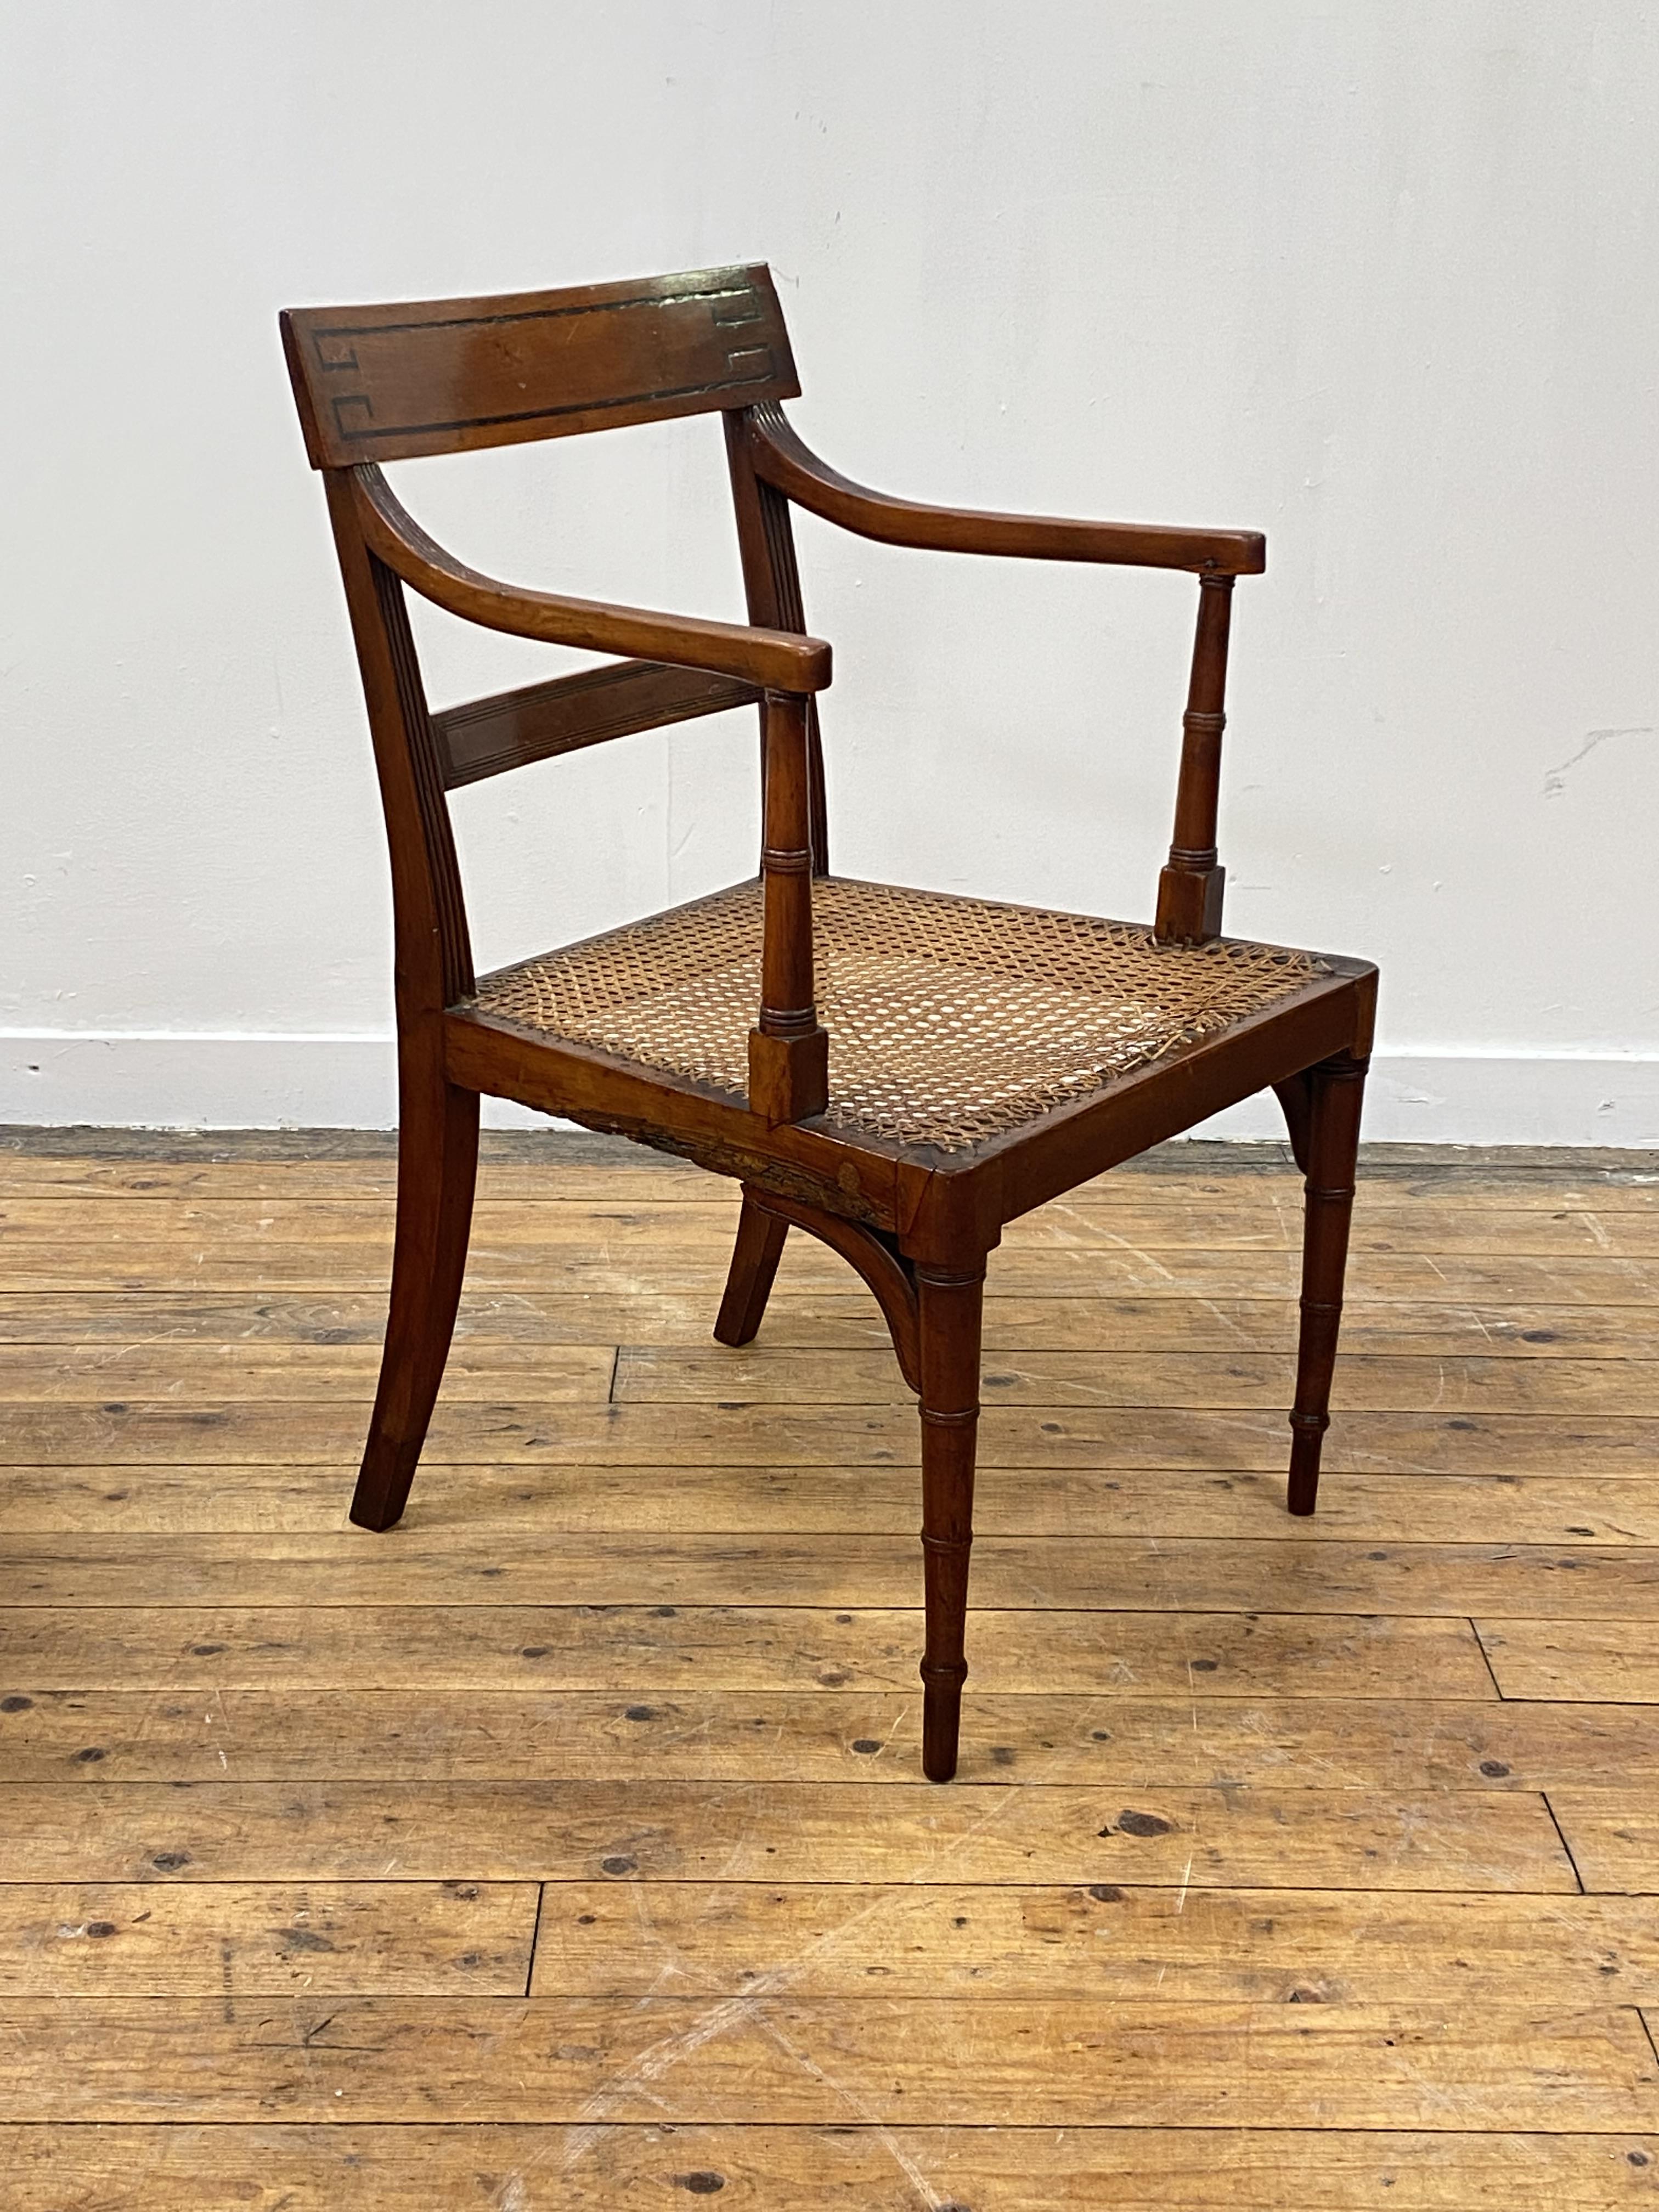 A Regency period yew wood elbow chair, the crest rail inlaid with ebony bands, above reeded open